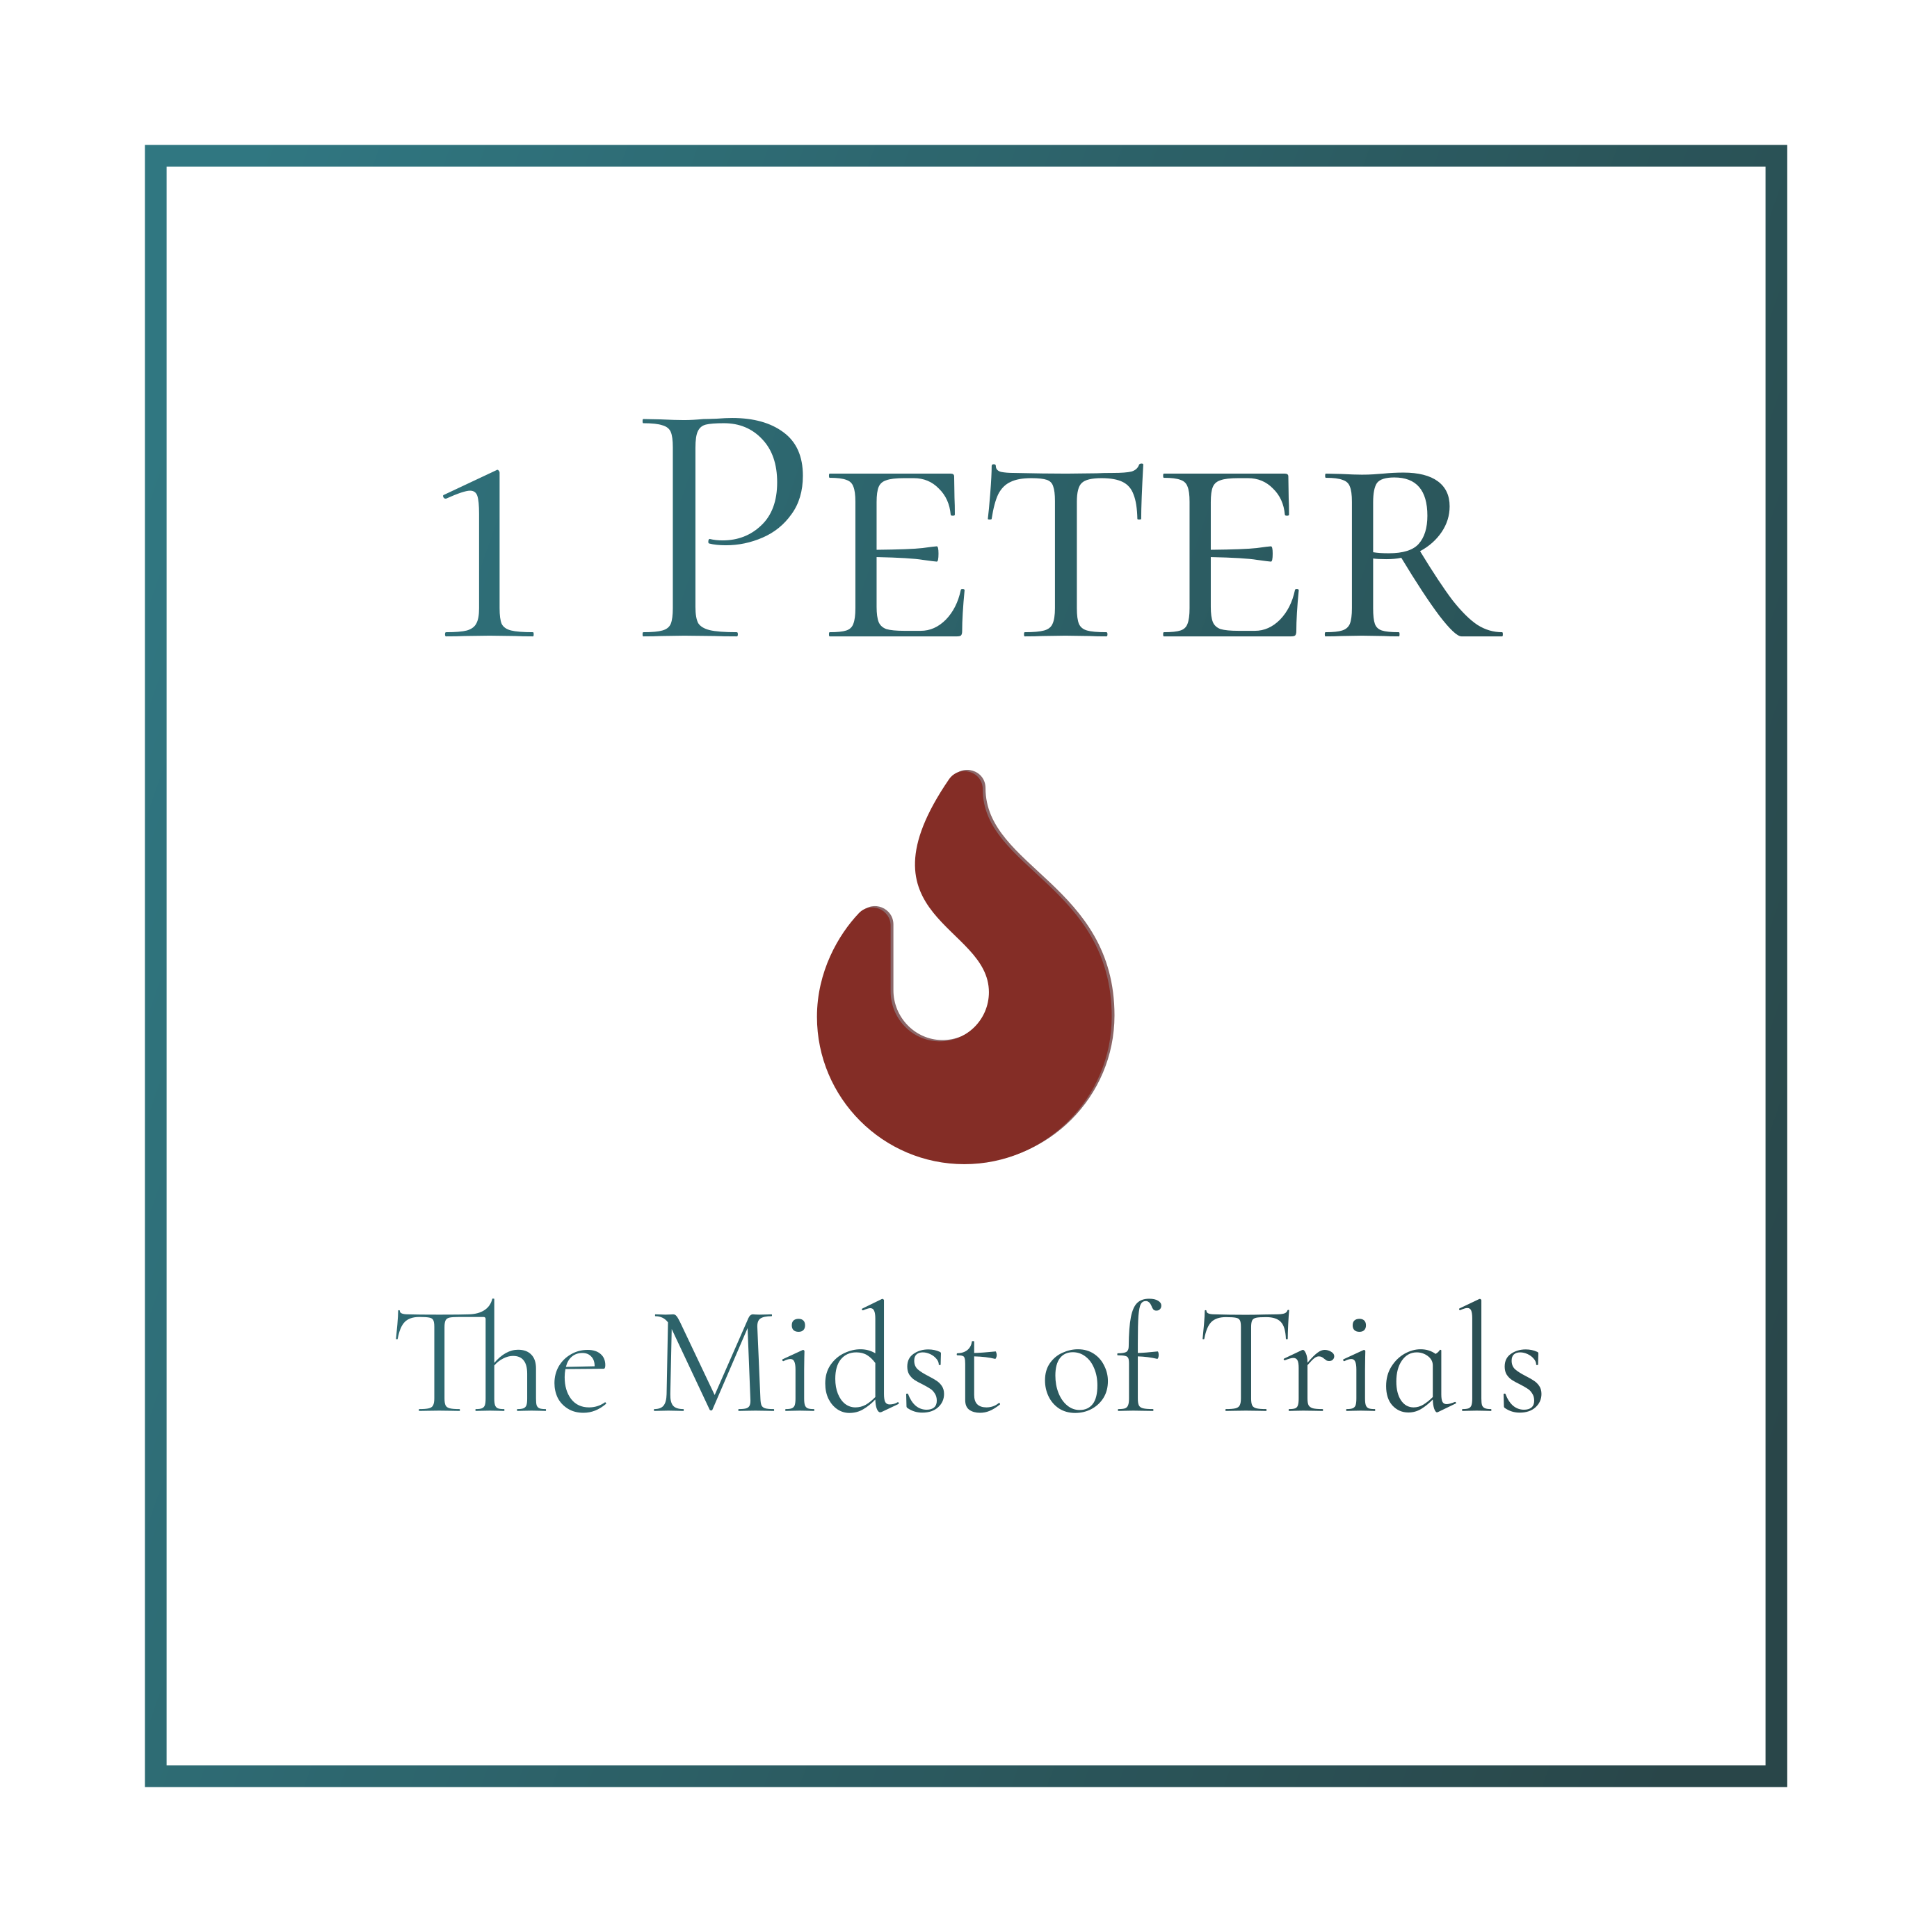 1 Peter: The Midst of Trials